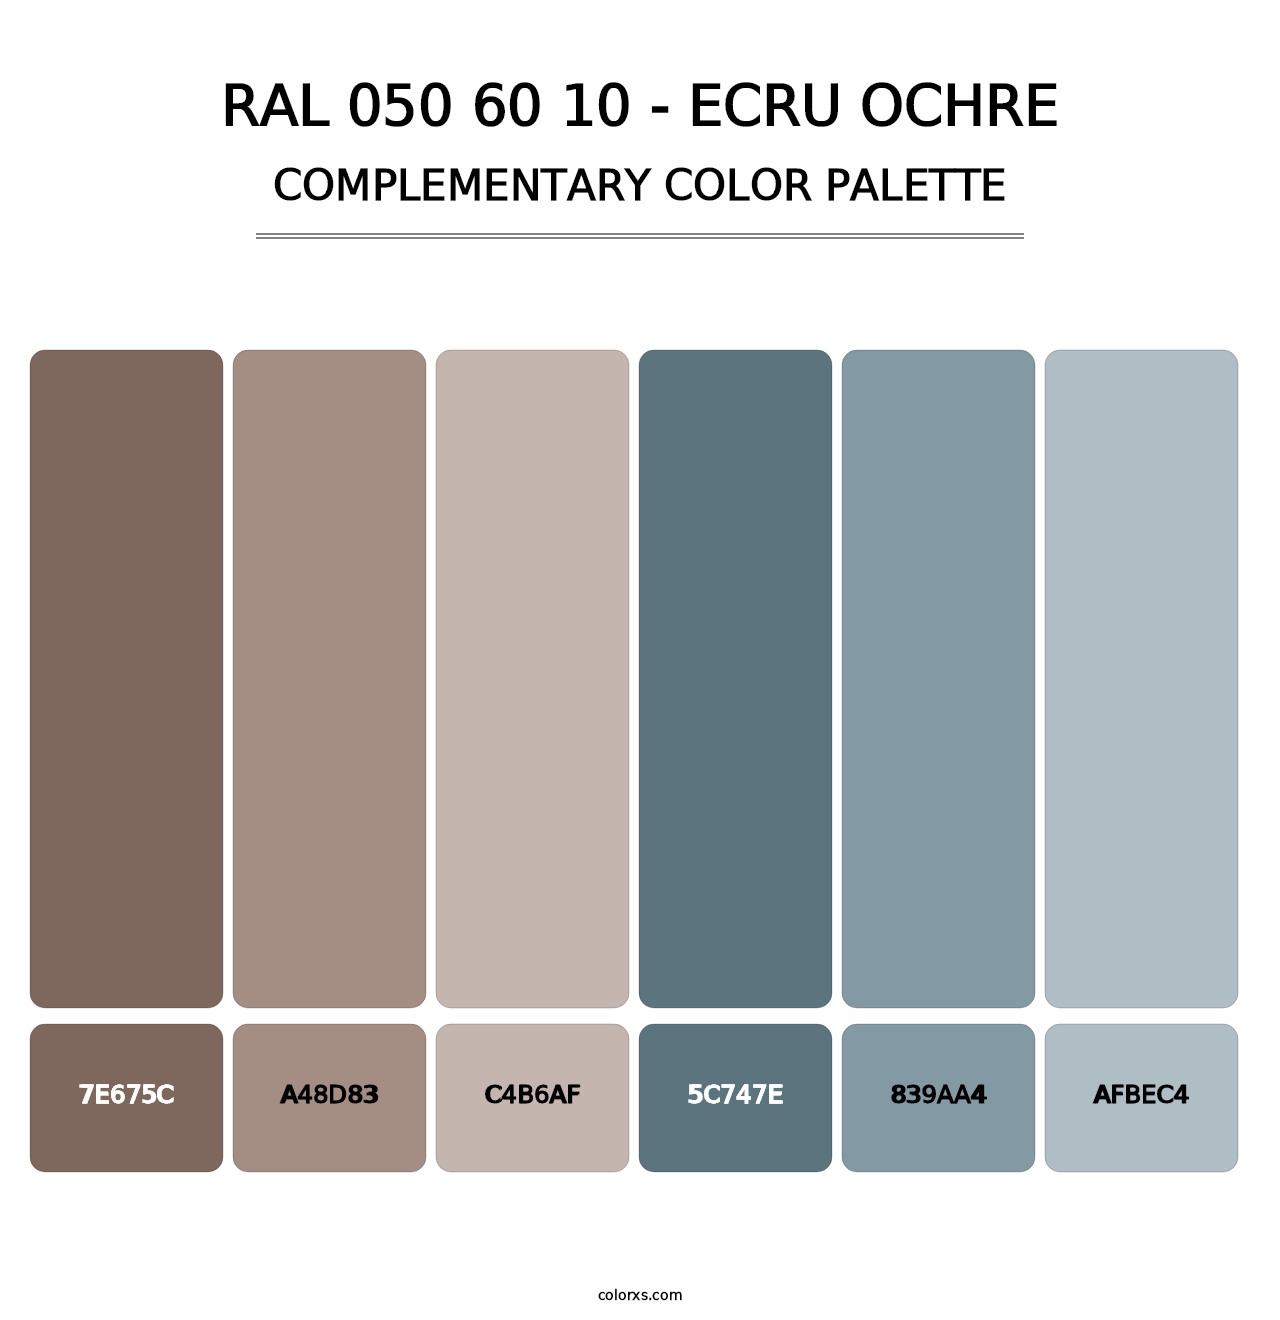 RAL 050 60 10 - Ecru Ochre - Complementary Color Palette